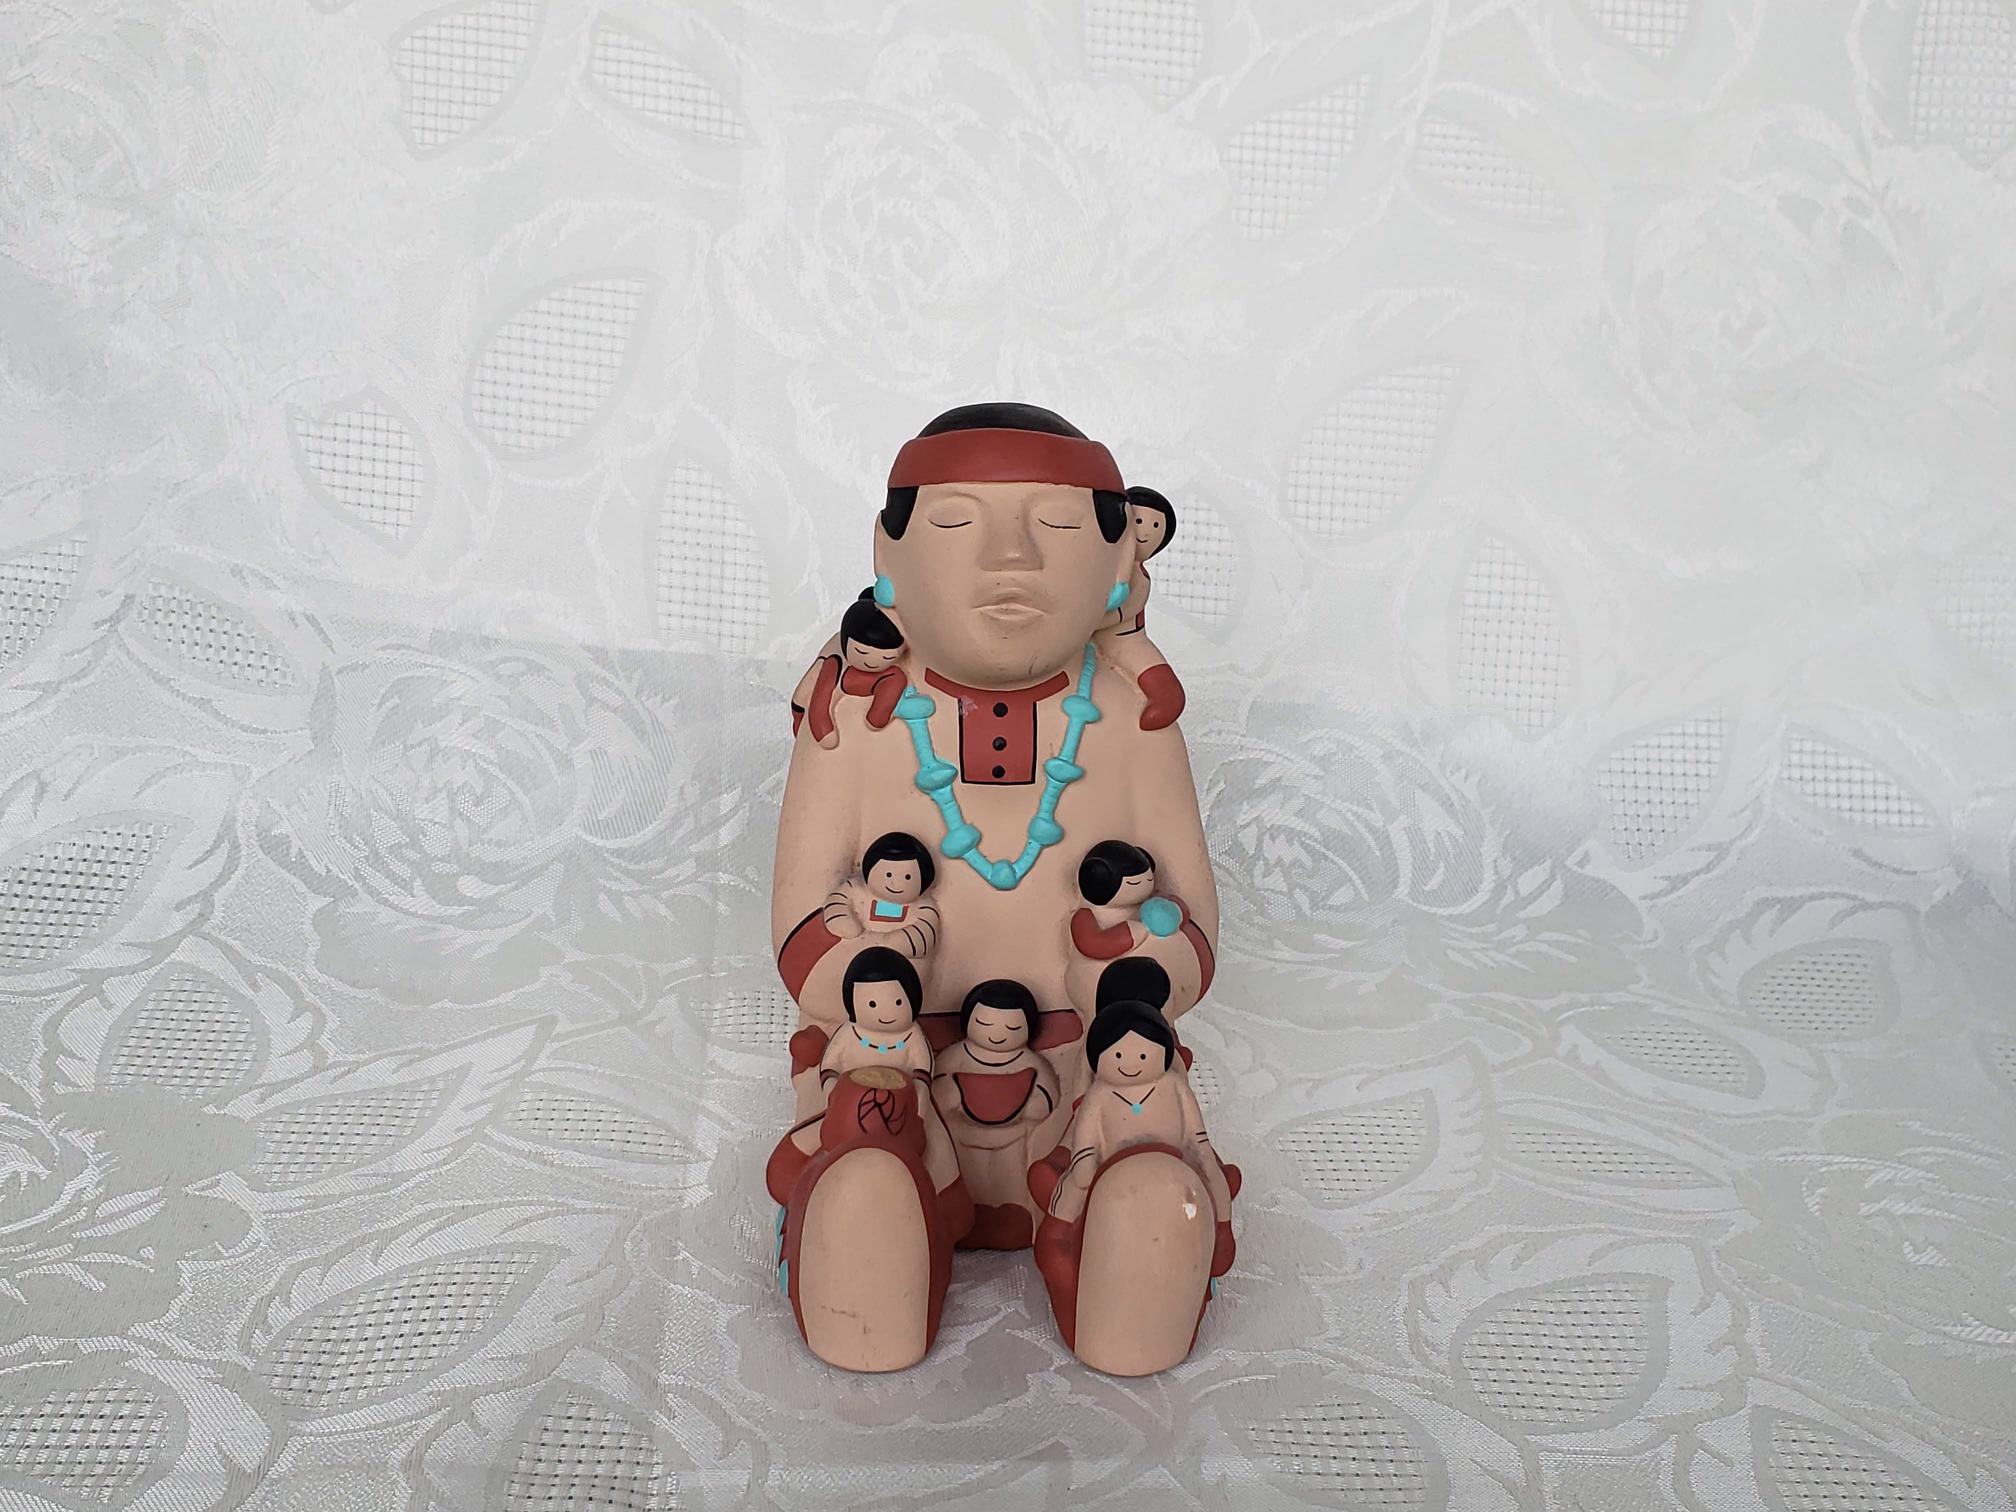 New Mexico Cleo Teissedre Southwestern Native American Storyteller Figurine ~ Free Shipping U.S.A ~ Signed Teissedre 86 Fine Tucson